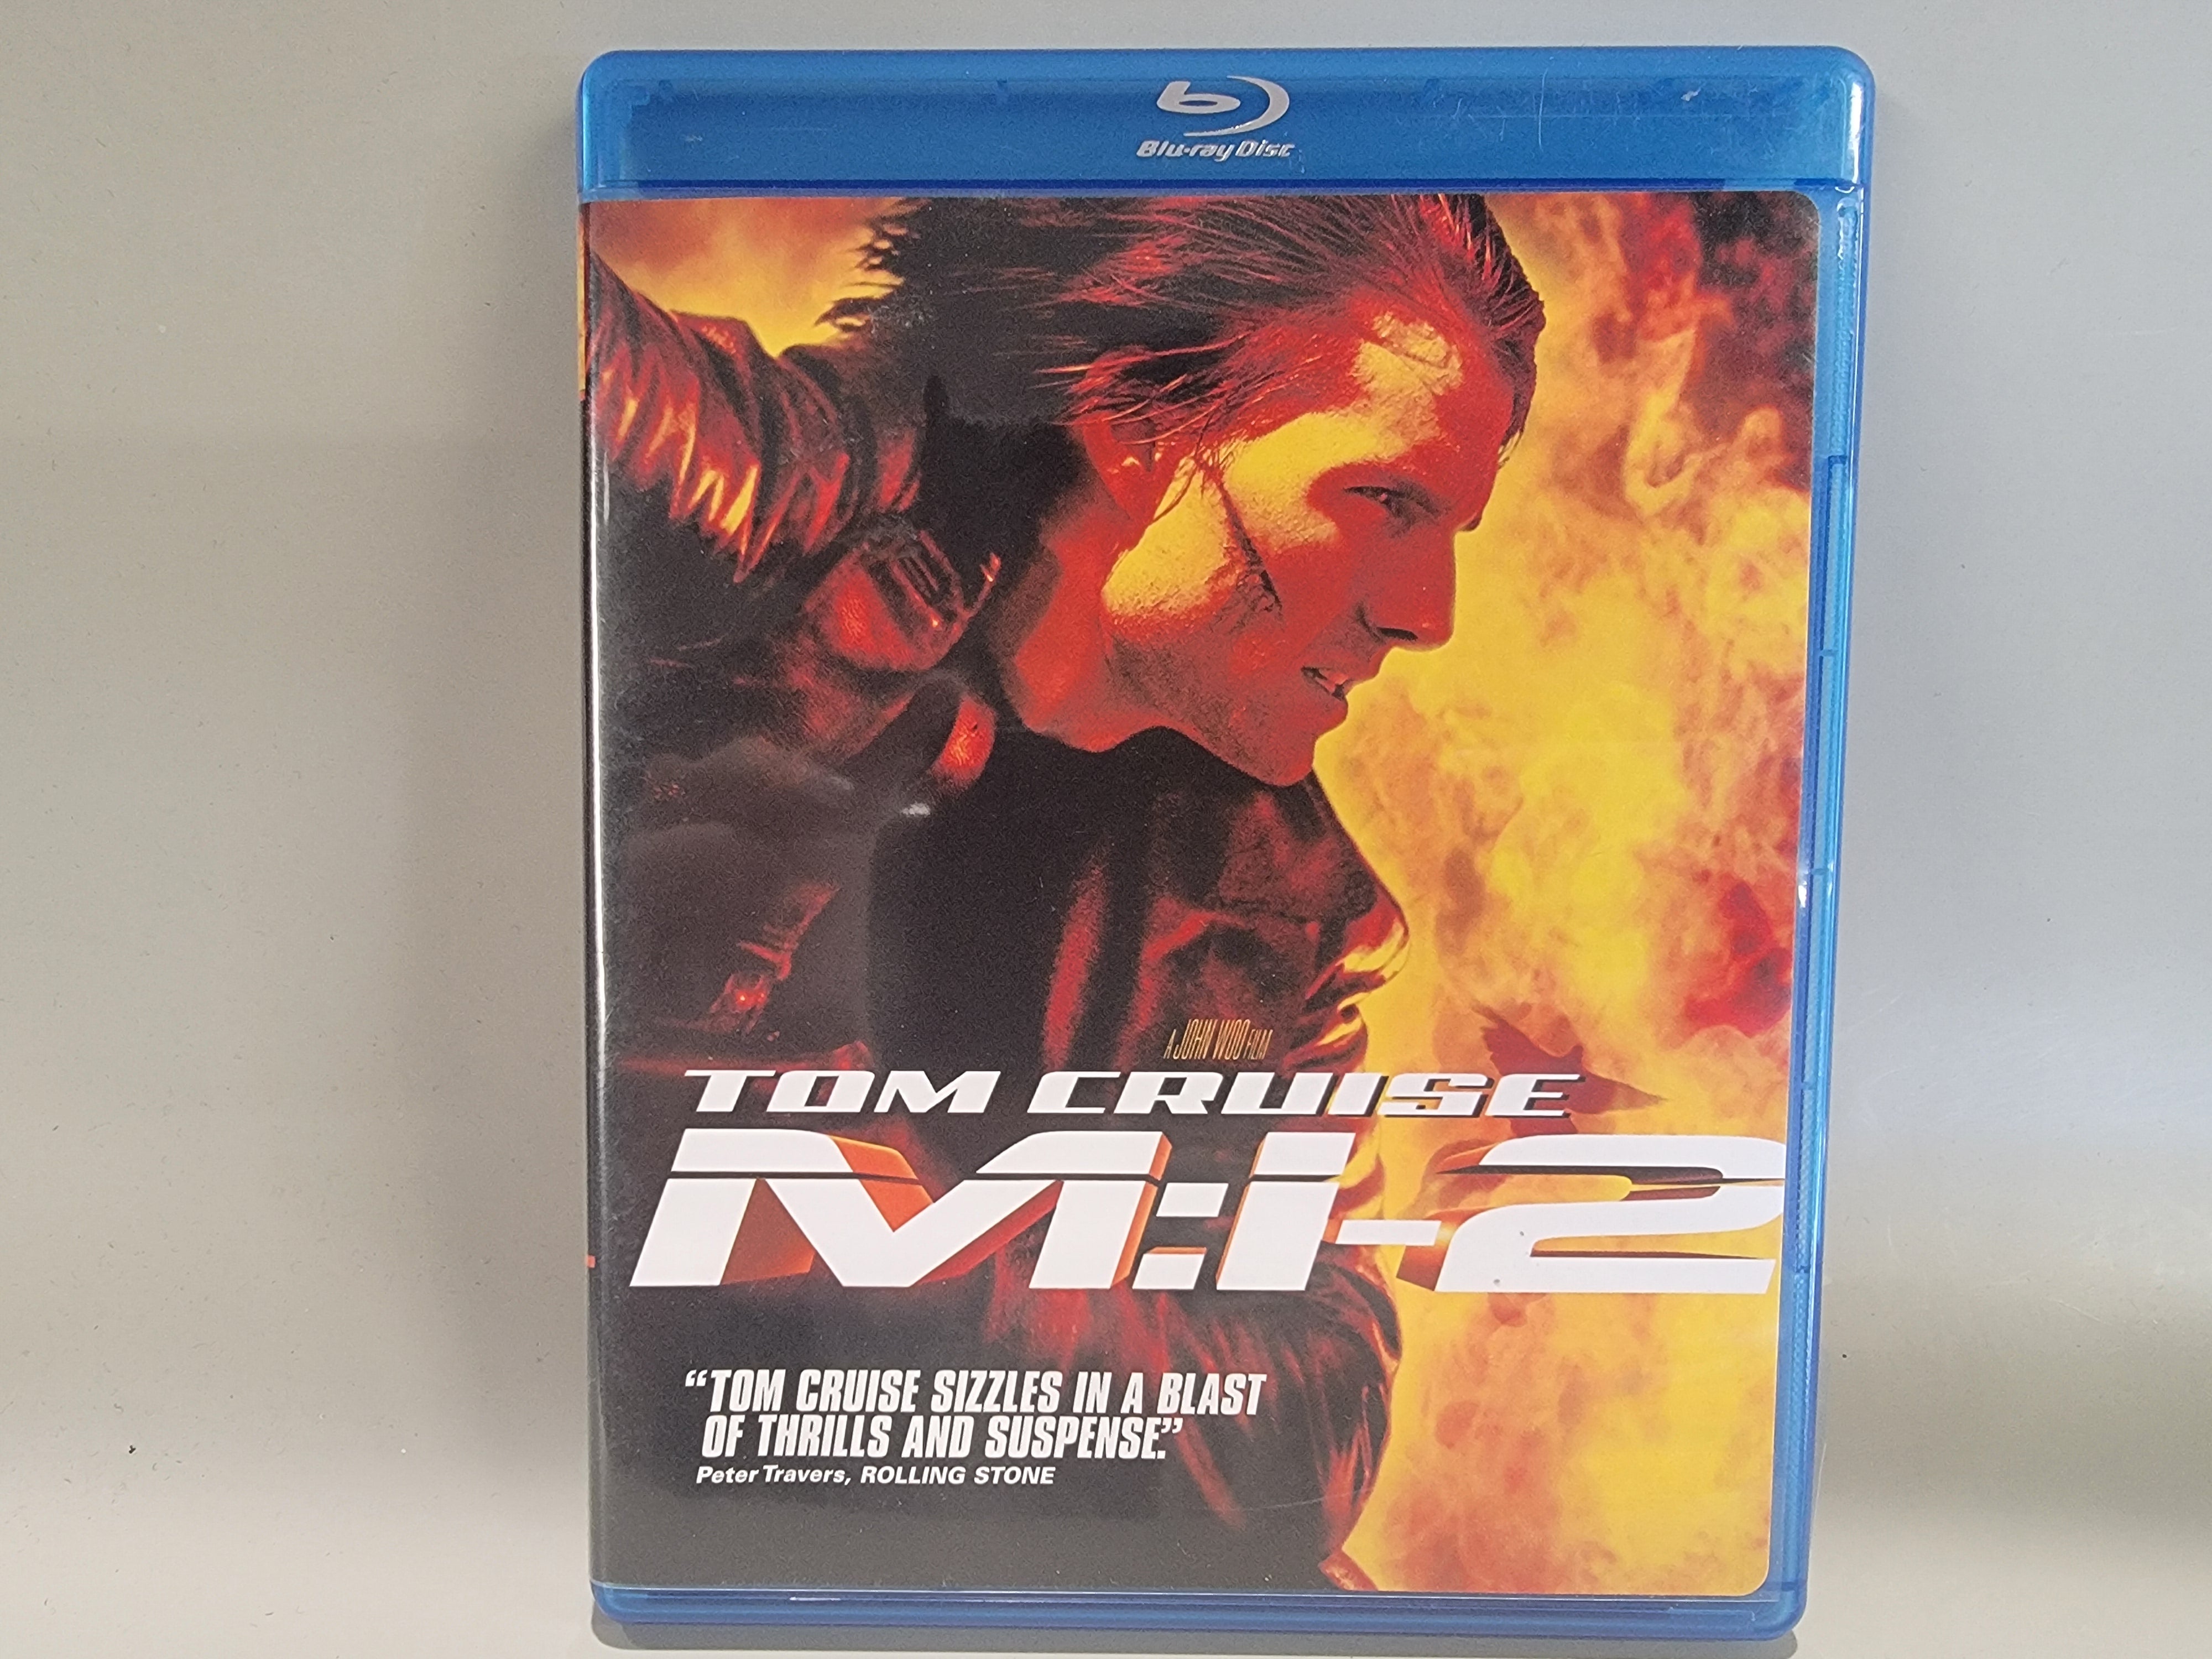 MISSION IMPOSSIBLE 2 BLU-RAY [USED]